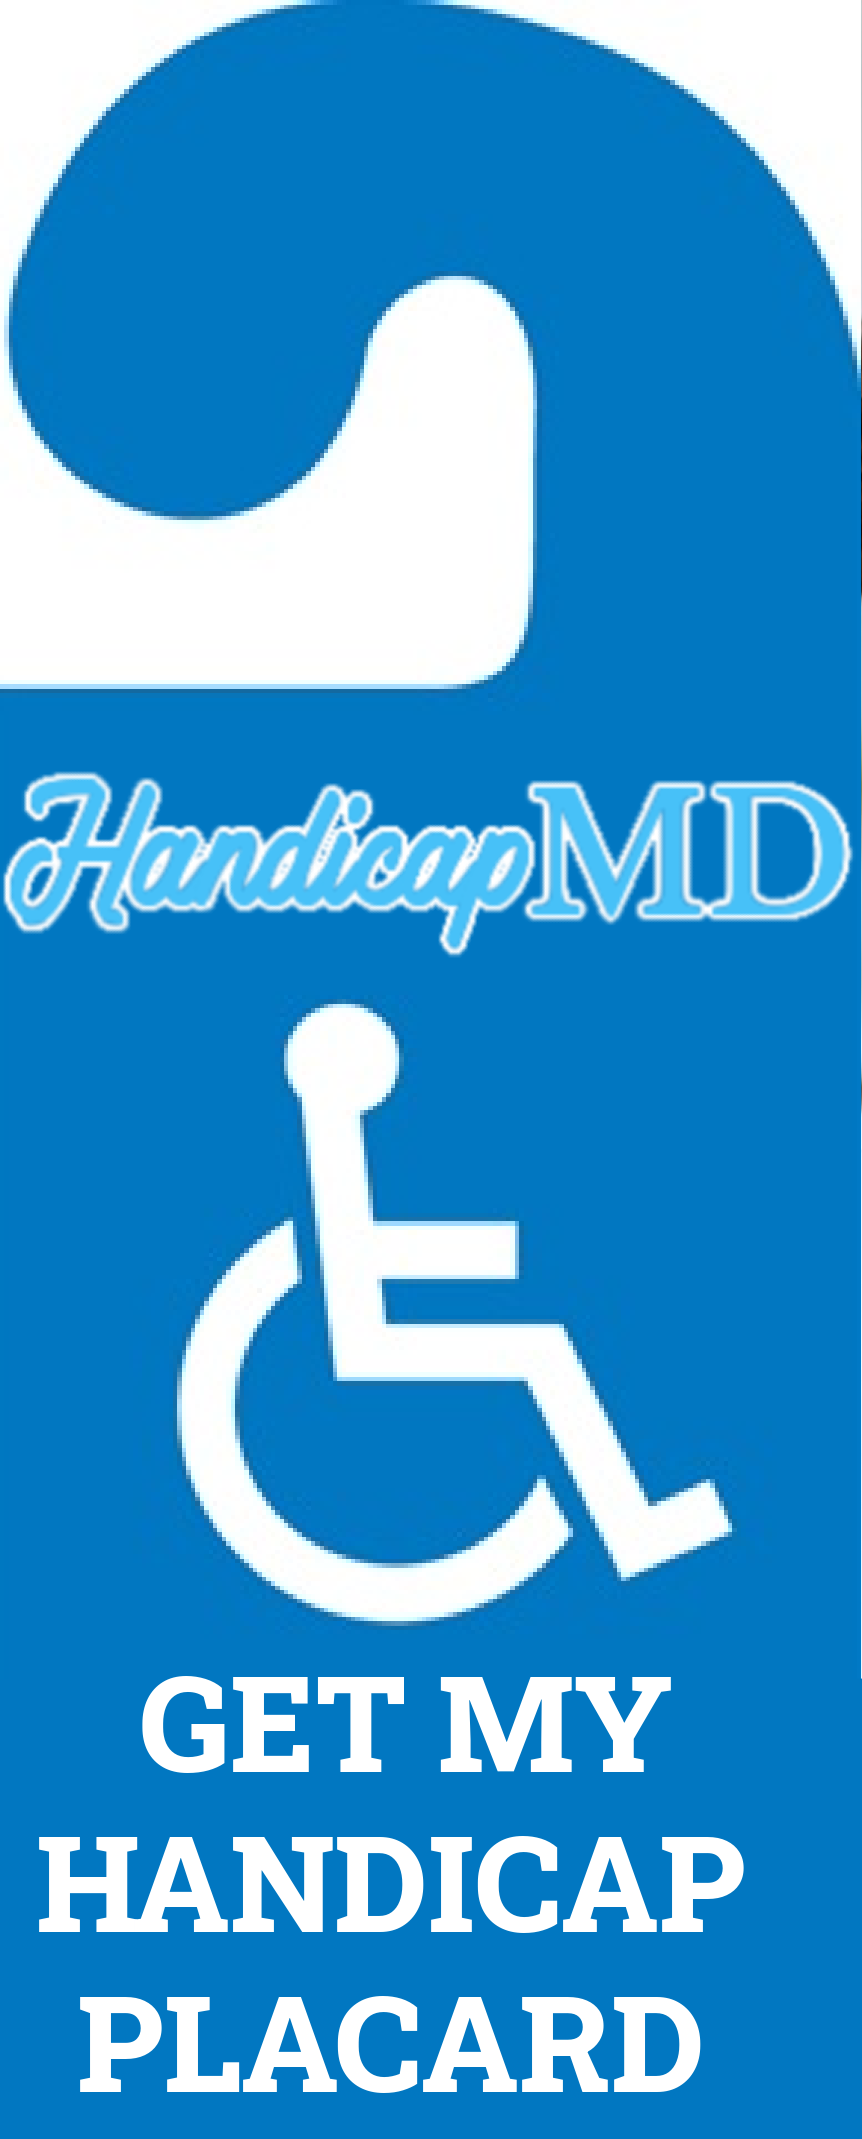 How to Obtain a Disabled Parking Permit in Florida